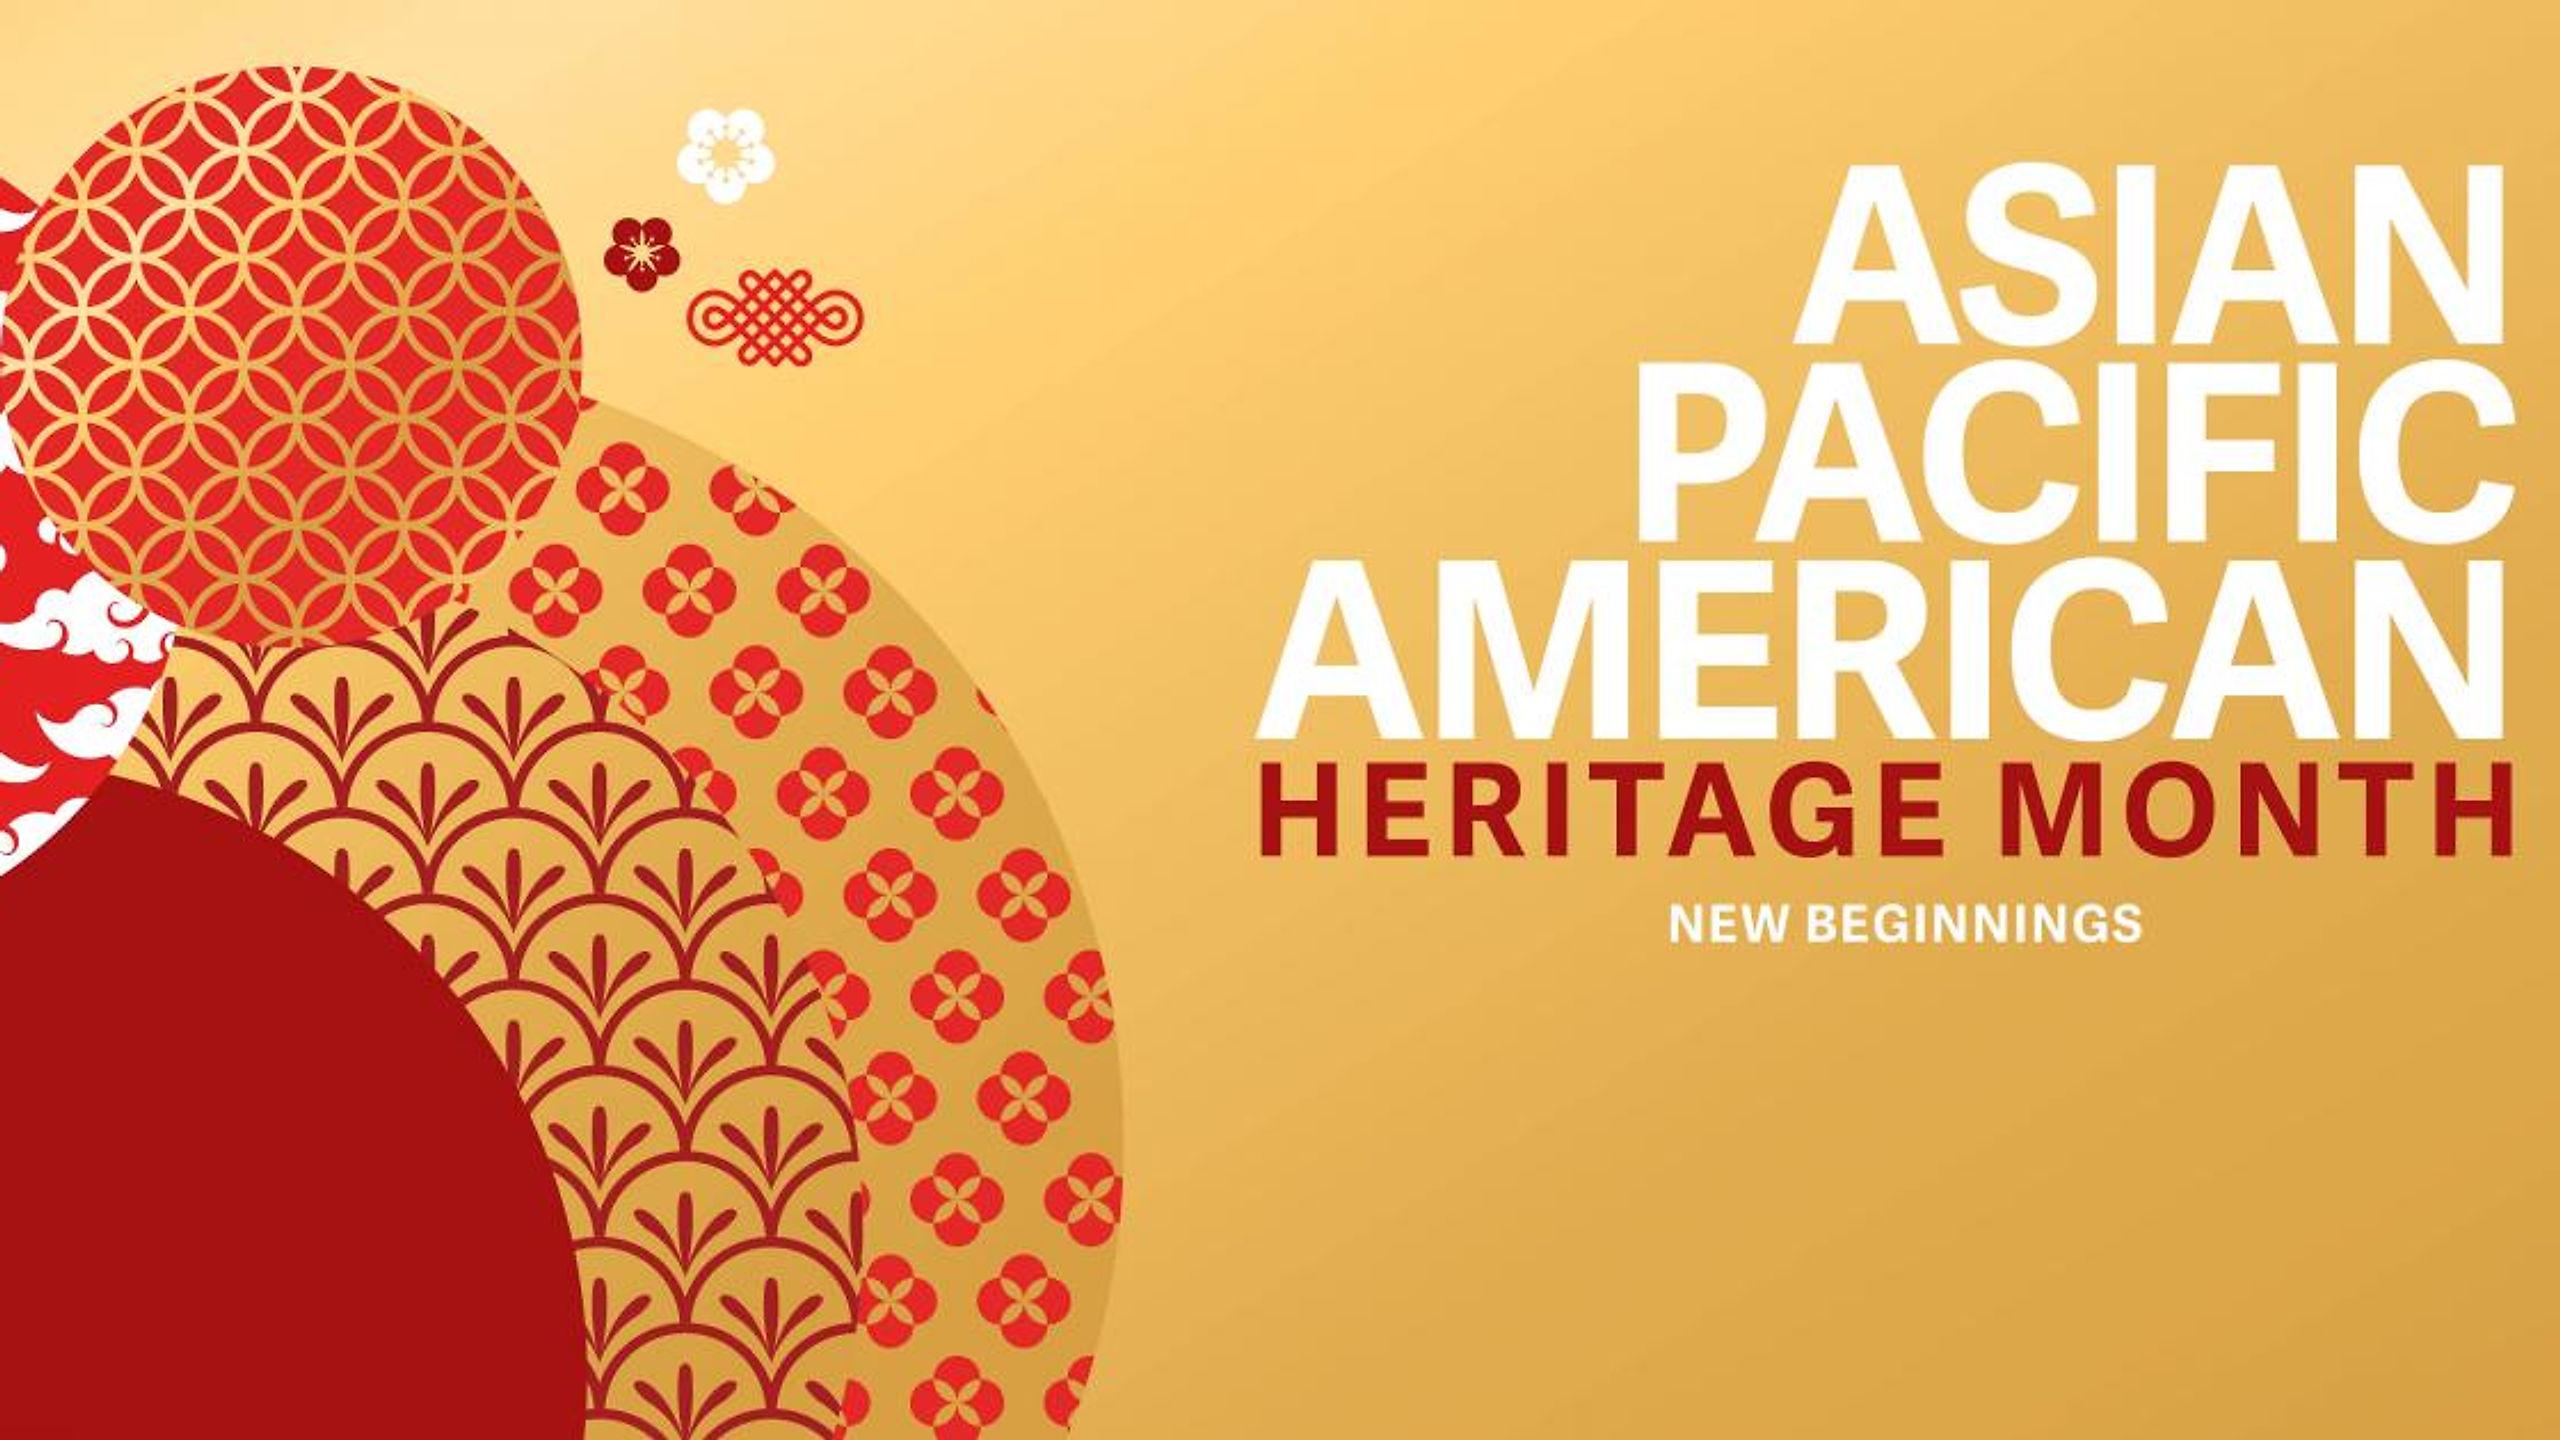 HONORING ASIAN-PACIFIC AMERICAN HERITAGE MONTH